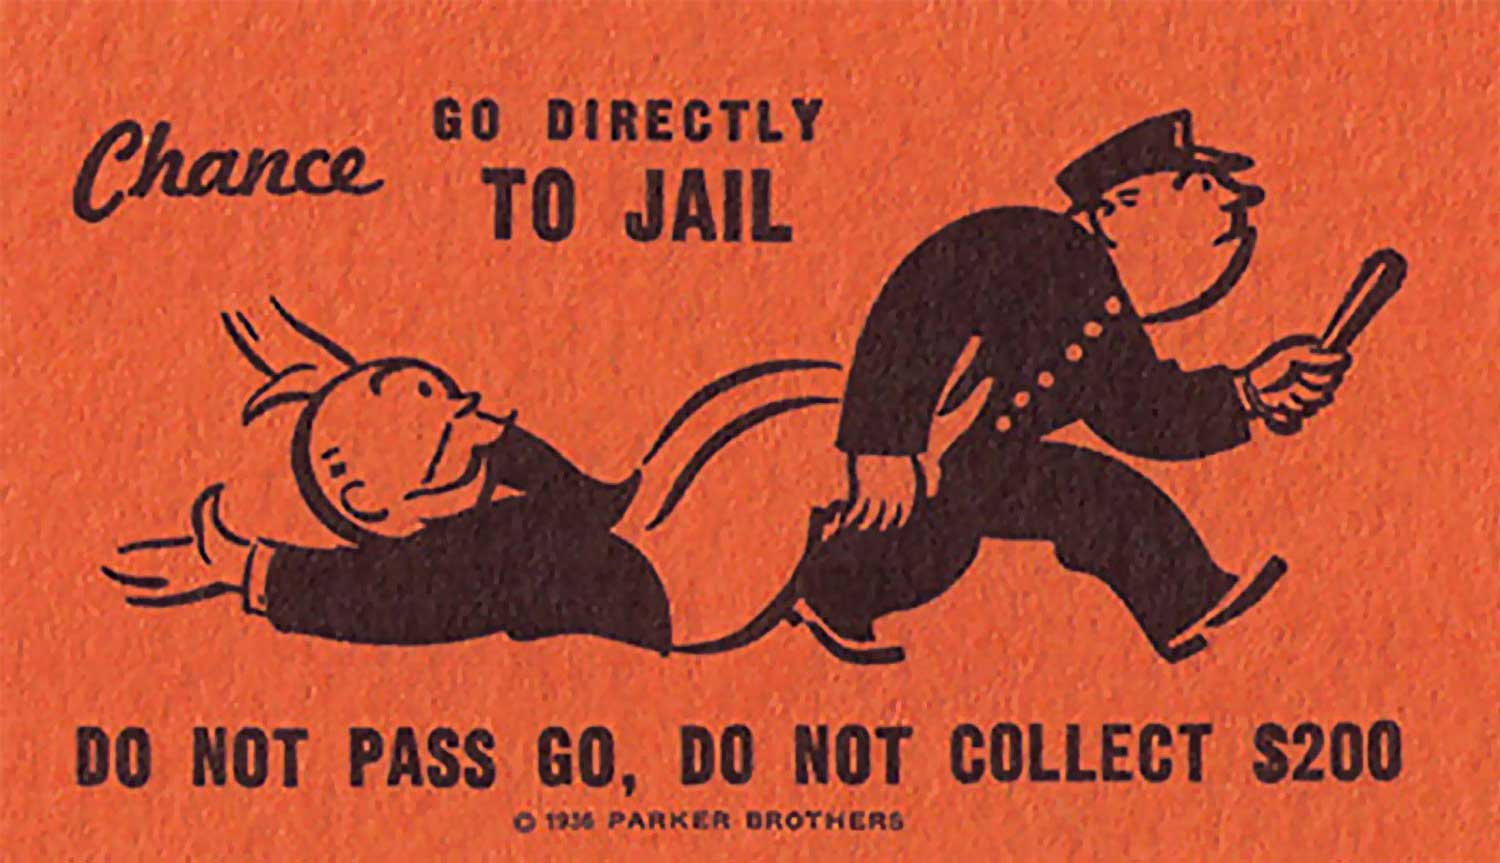 Go Directly To Jail!